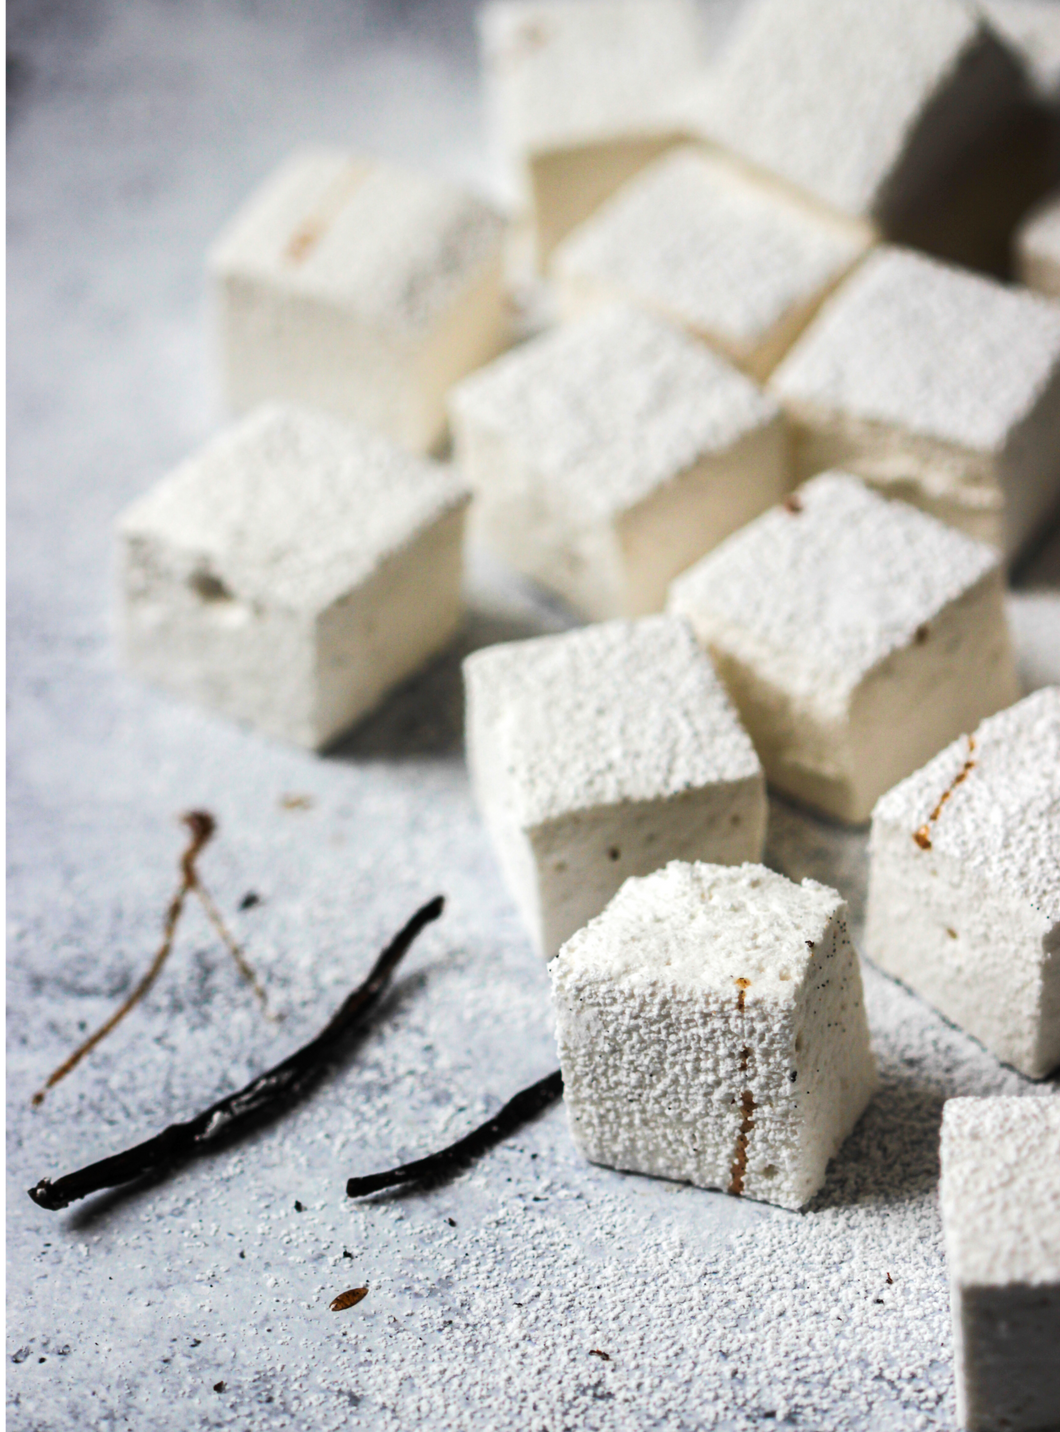 Tabletop with 12 white puffy square marshmallows dusted with powdered sugar, and drizzled with vanilla, decorated with two whole vanilla beans..